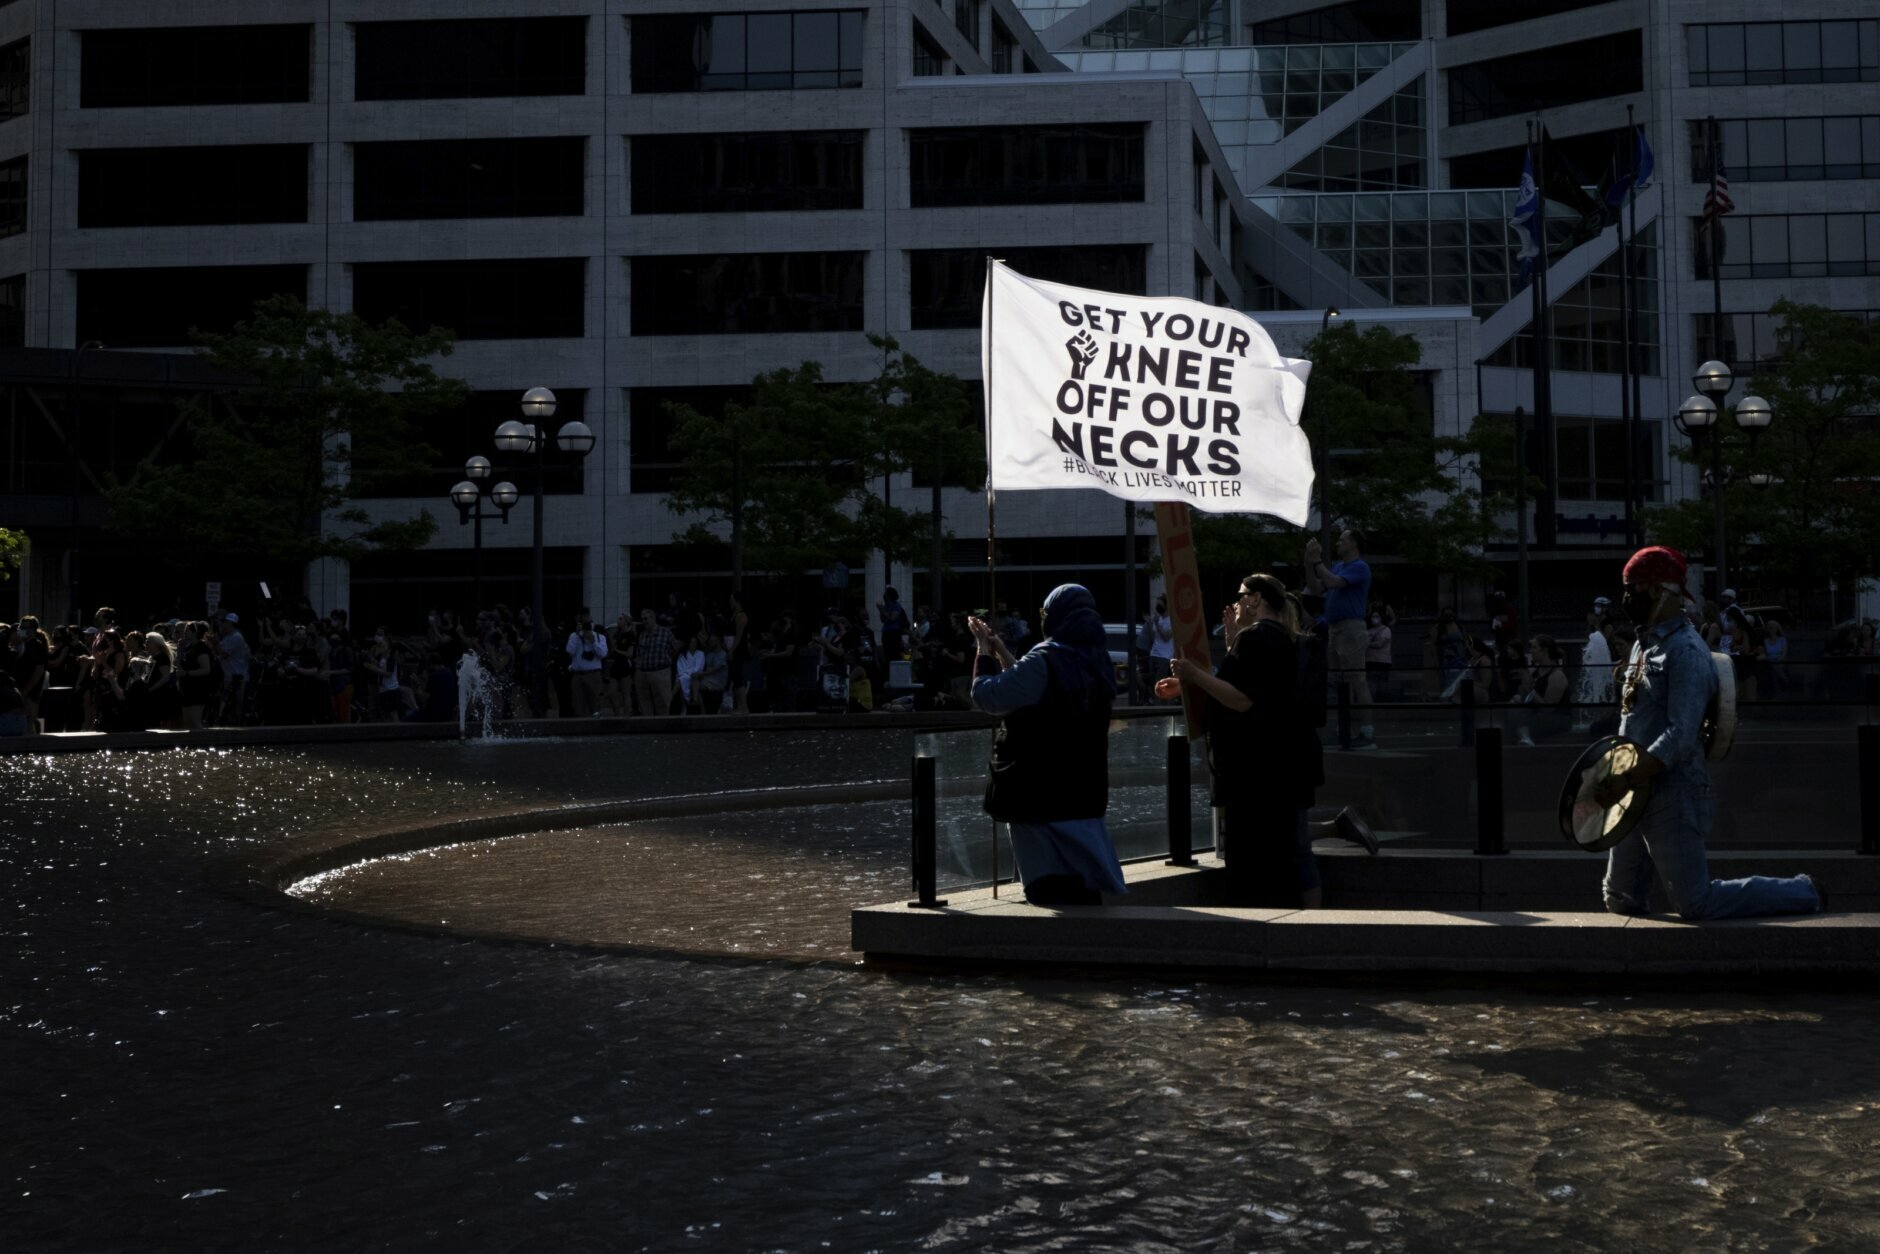 People attend a rally and march for the one year anniversary of George Floyd's death on Sunday, May 23, 2021, in Minneapolis, Minn. (AP Photo/Christian Monterrosa)